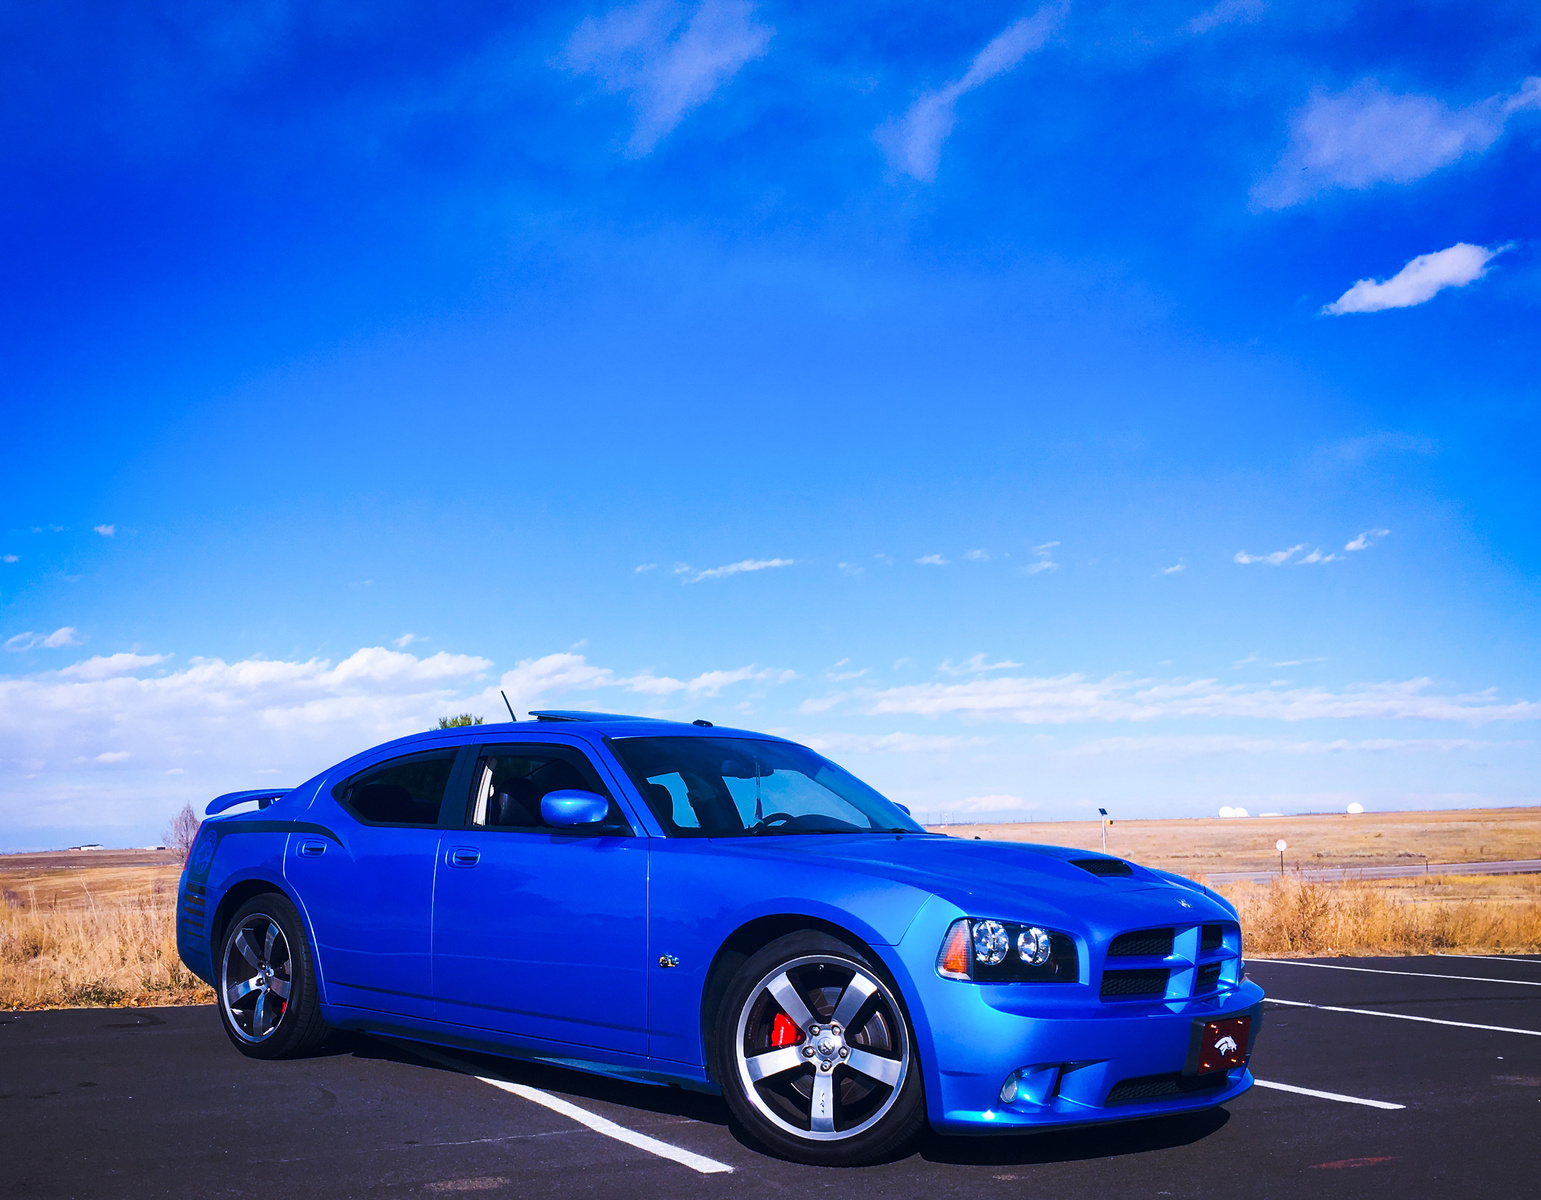 2008 Dodge Charger: Prices, Reviews & Pictures 